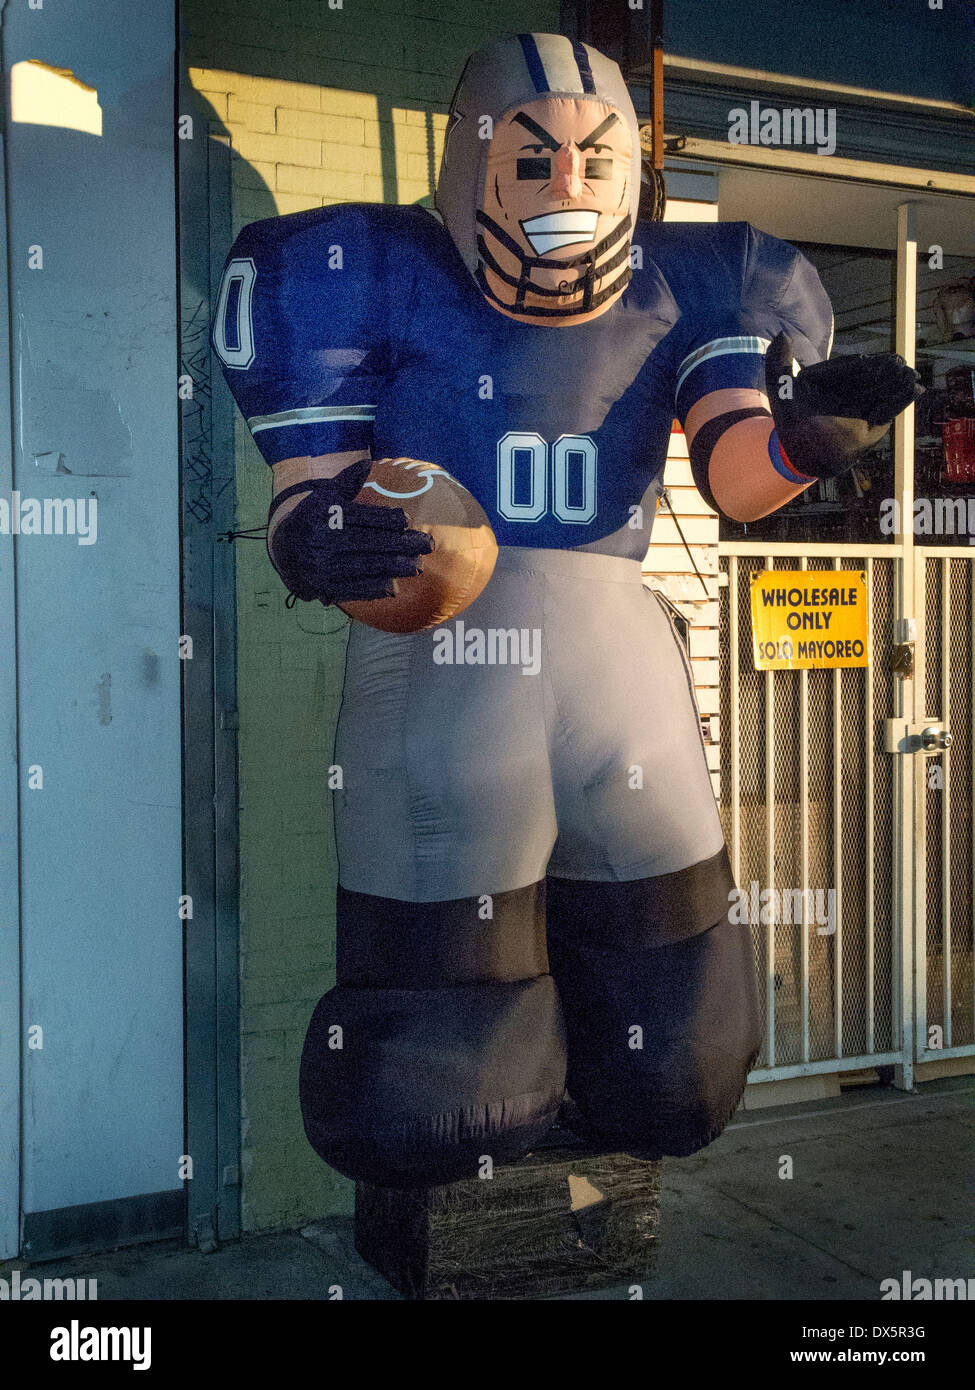 An inflated football player figure serves as an advertisement in the Los Angeles garment district. Stock Photo